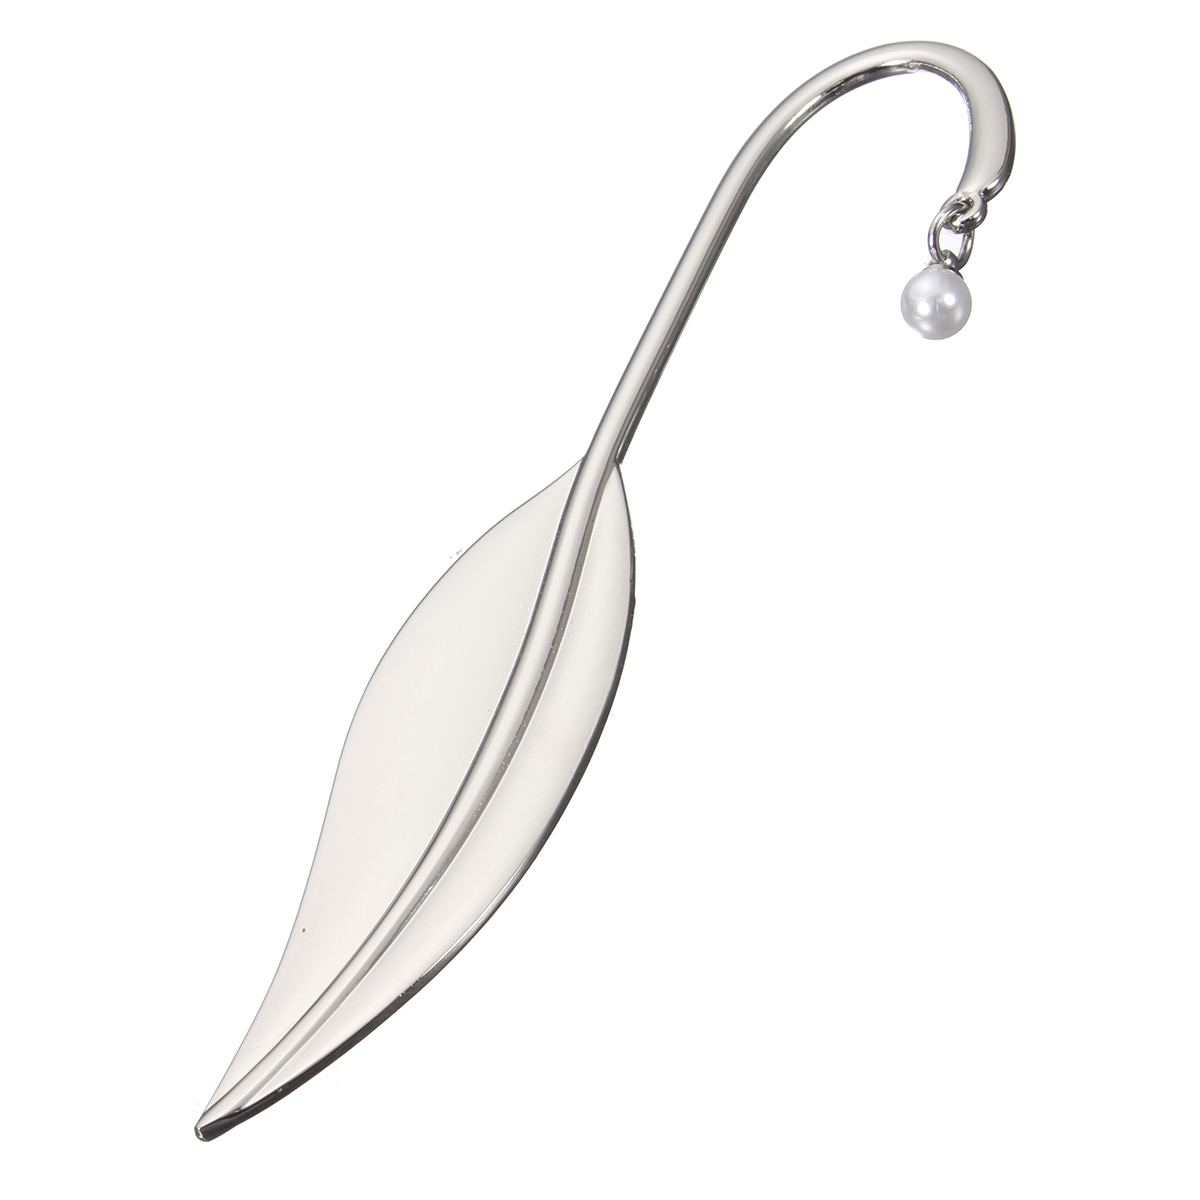 1pcs-Delicate-Leaf-Metal-Bookmark-For-Boooks-Silver-Paper-Book-Marks-Holder-For-School-Supplies-1136748